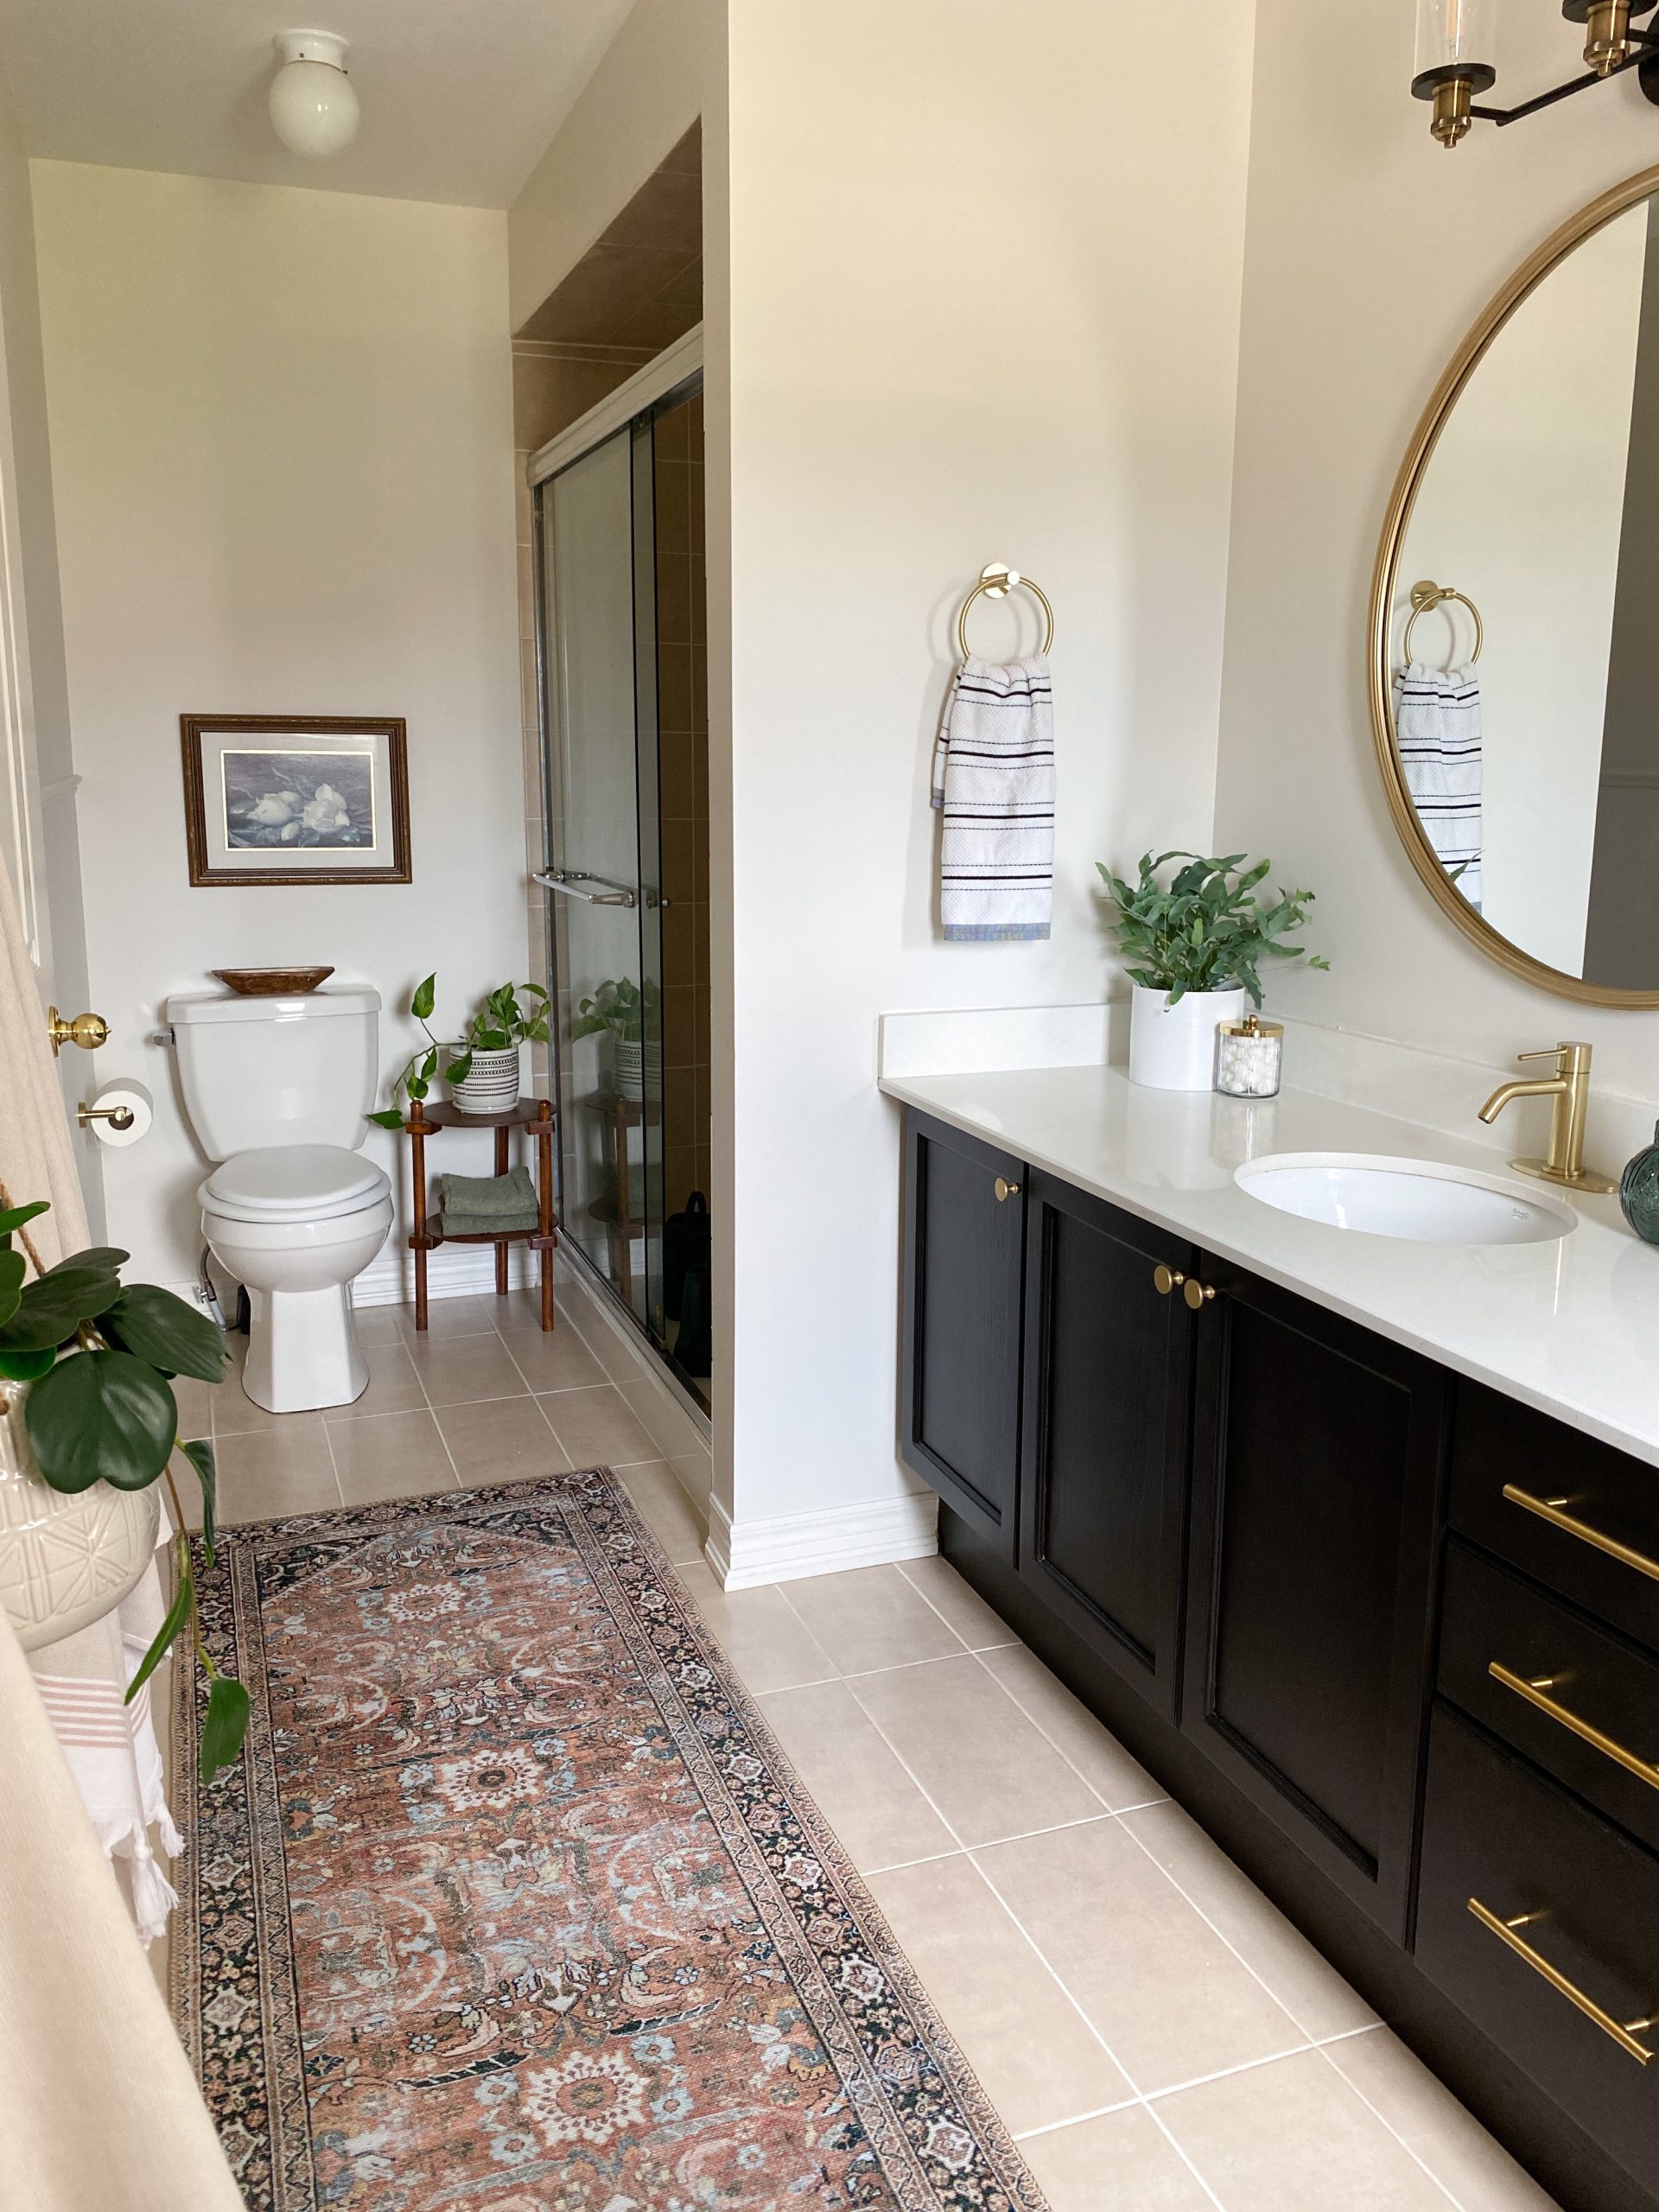 4 Ways to Make Your Bathroom Counter Look More Expensive